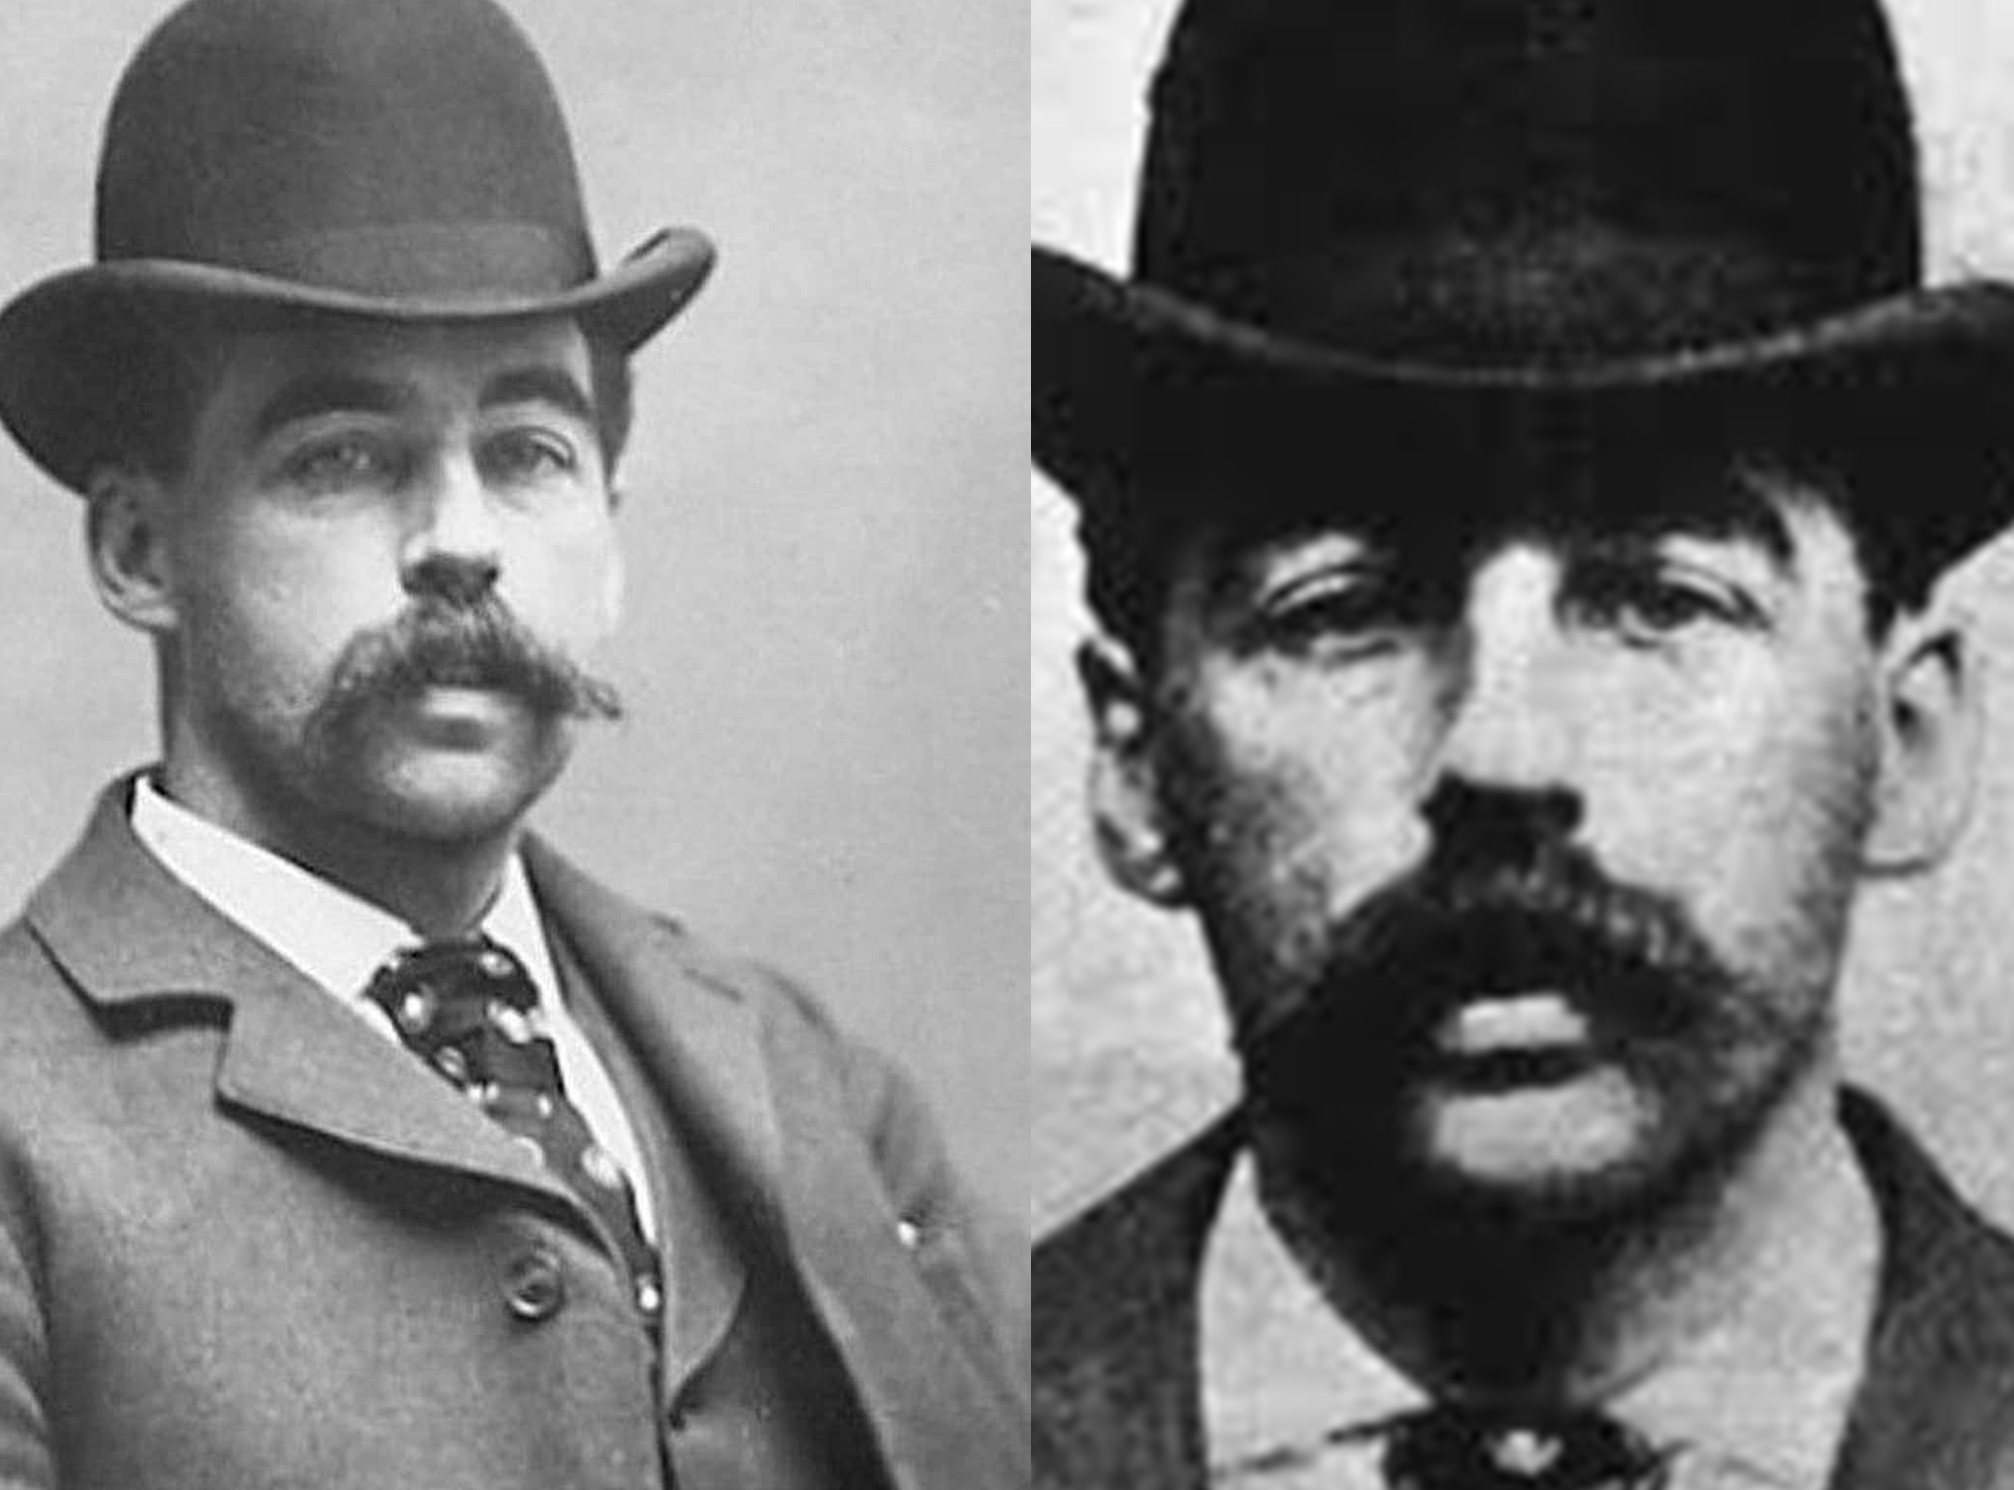 Attractive Killers and Criminals - hh holmes